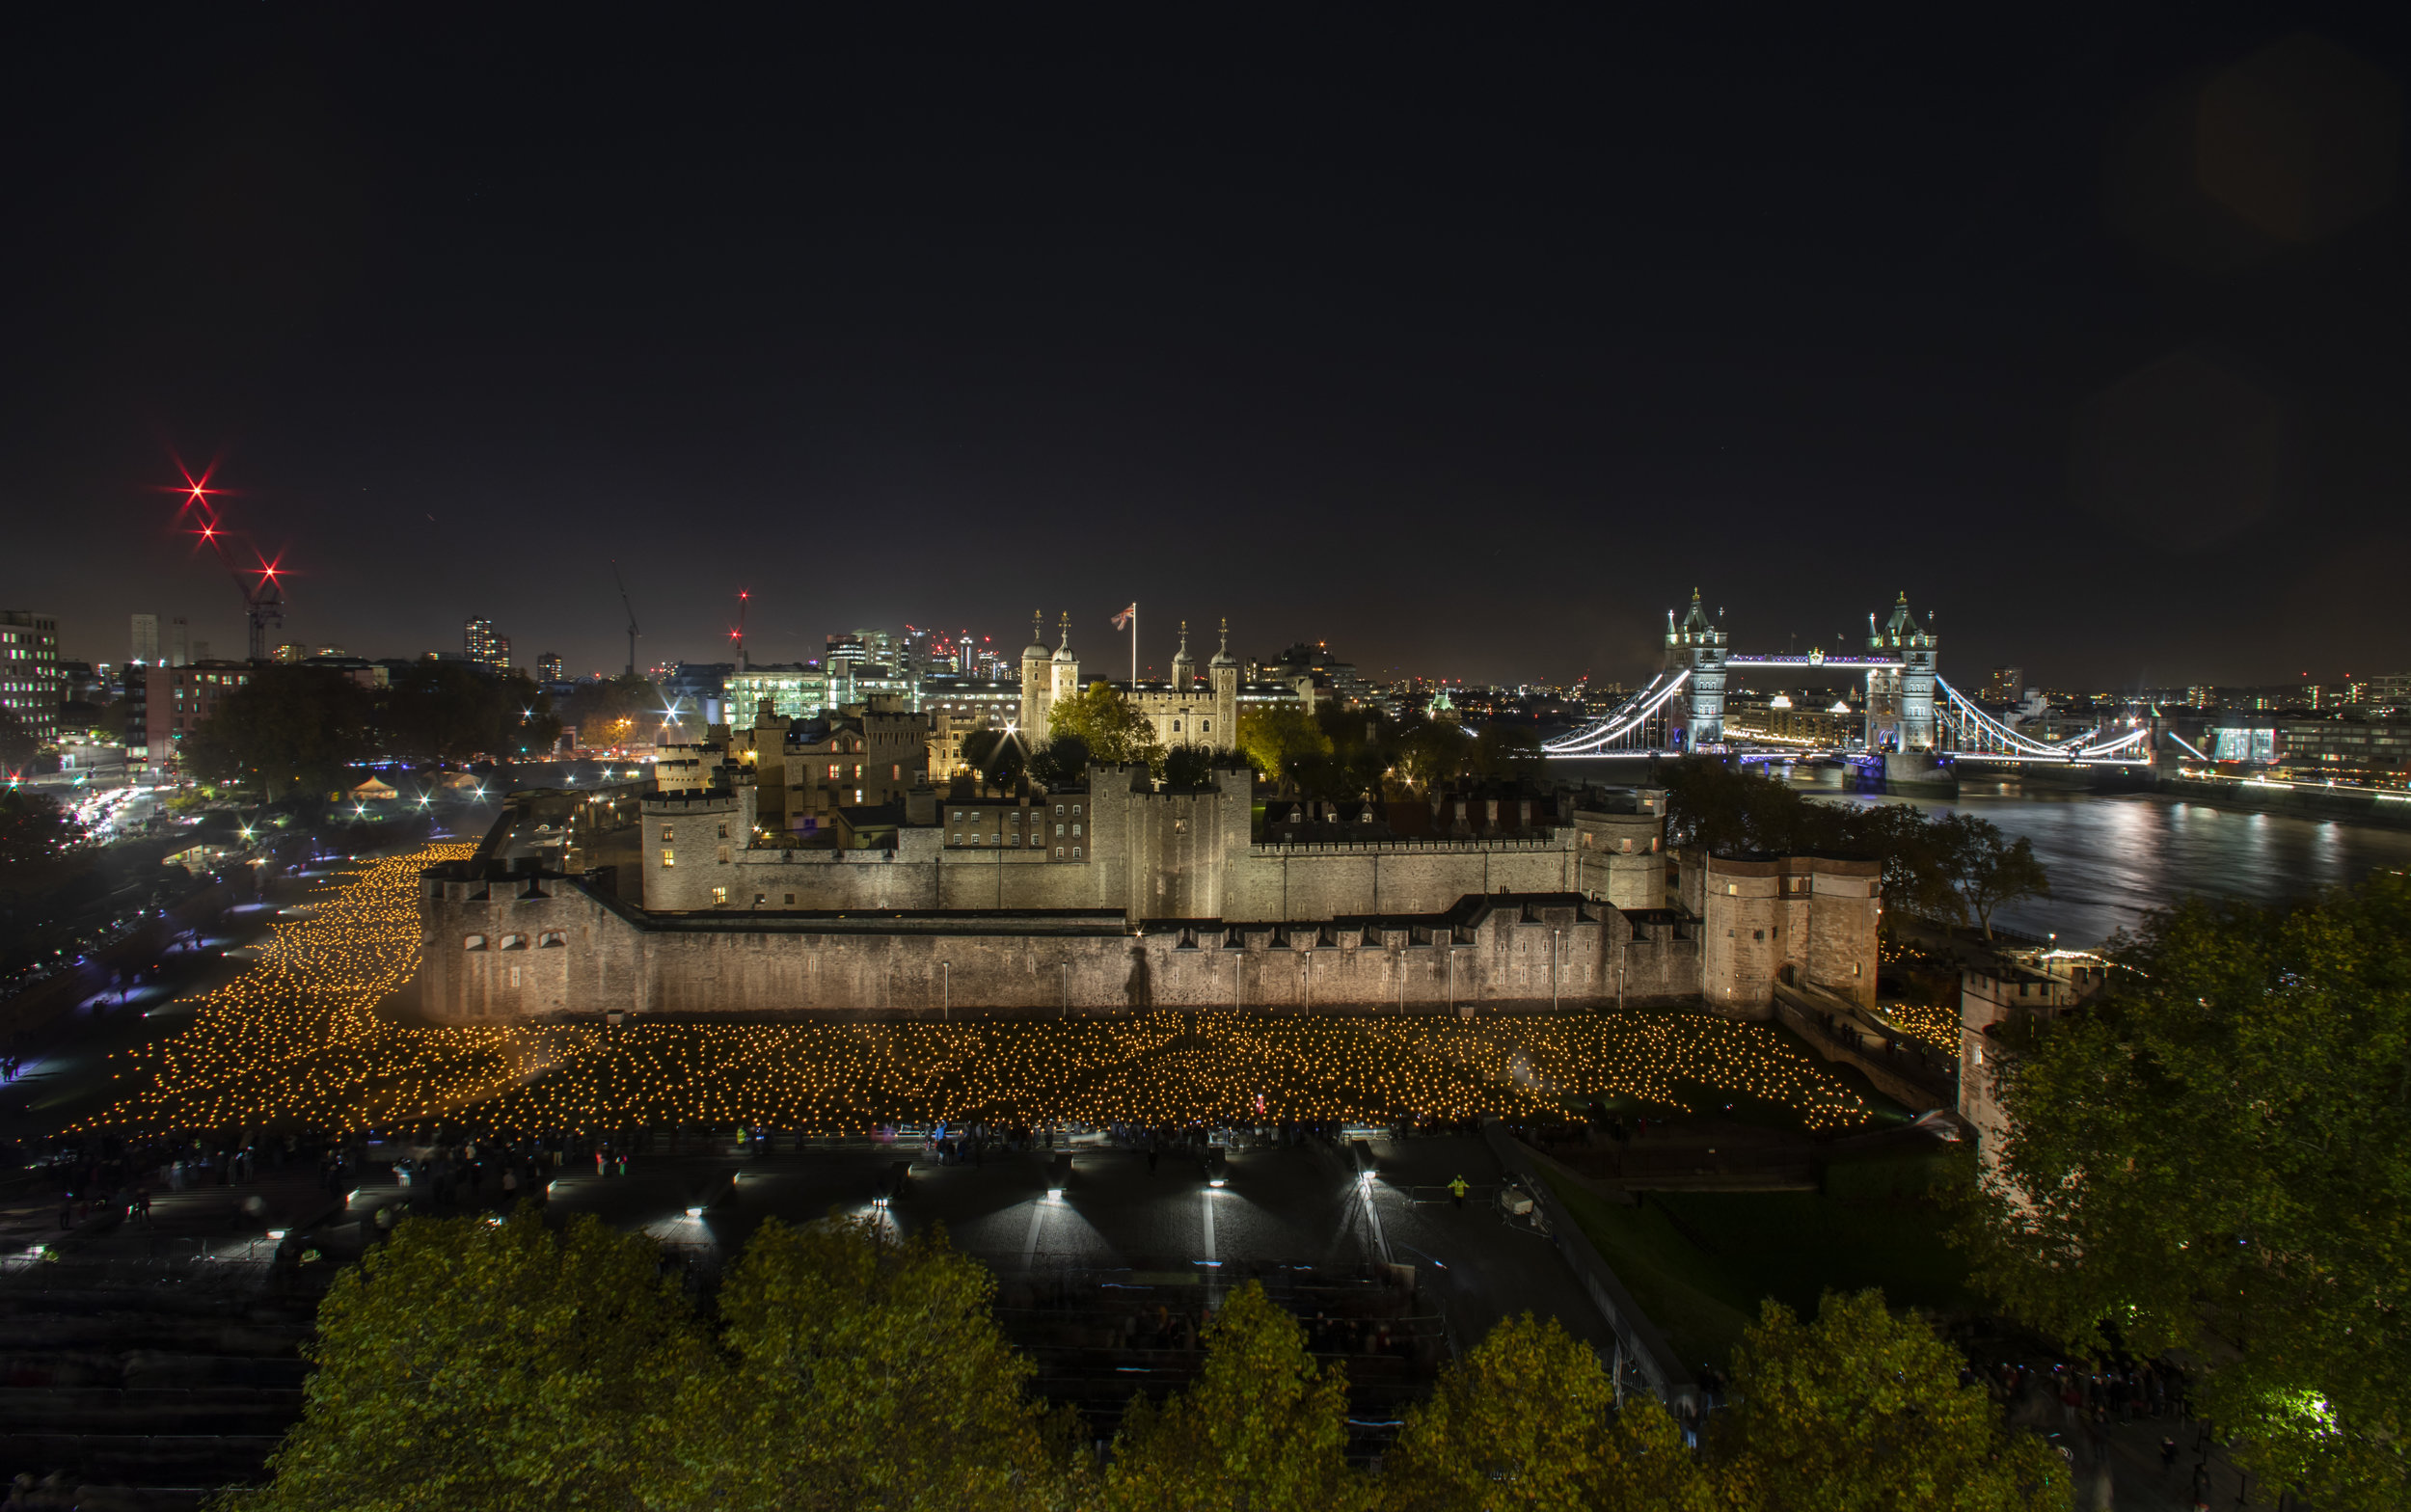  'Beyond the Deepening Shadow: The Tower Remembers'  
An installation at The Tower of London. Which consists of thousands of individual flames illuminate the moat of The Tower of London to mark 100 year since the first World War ended.
Photo by Andre